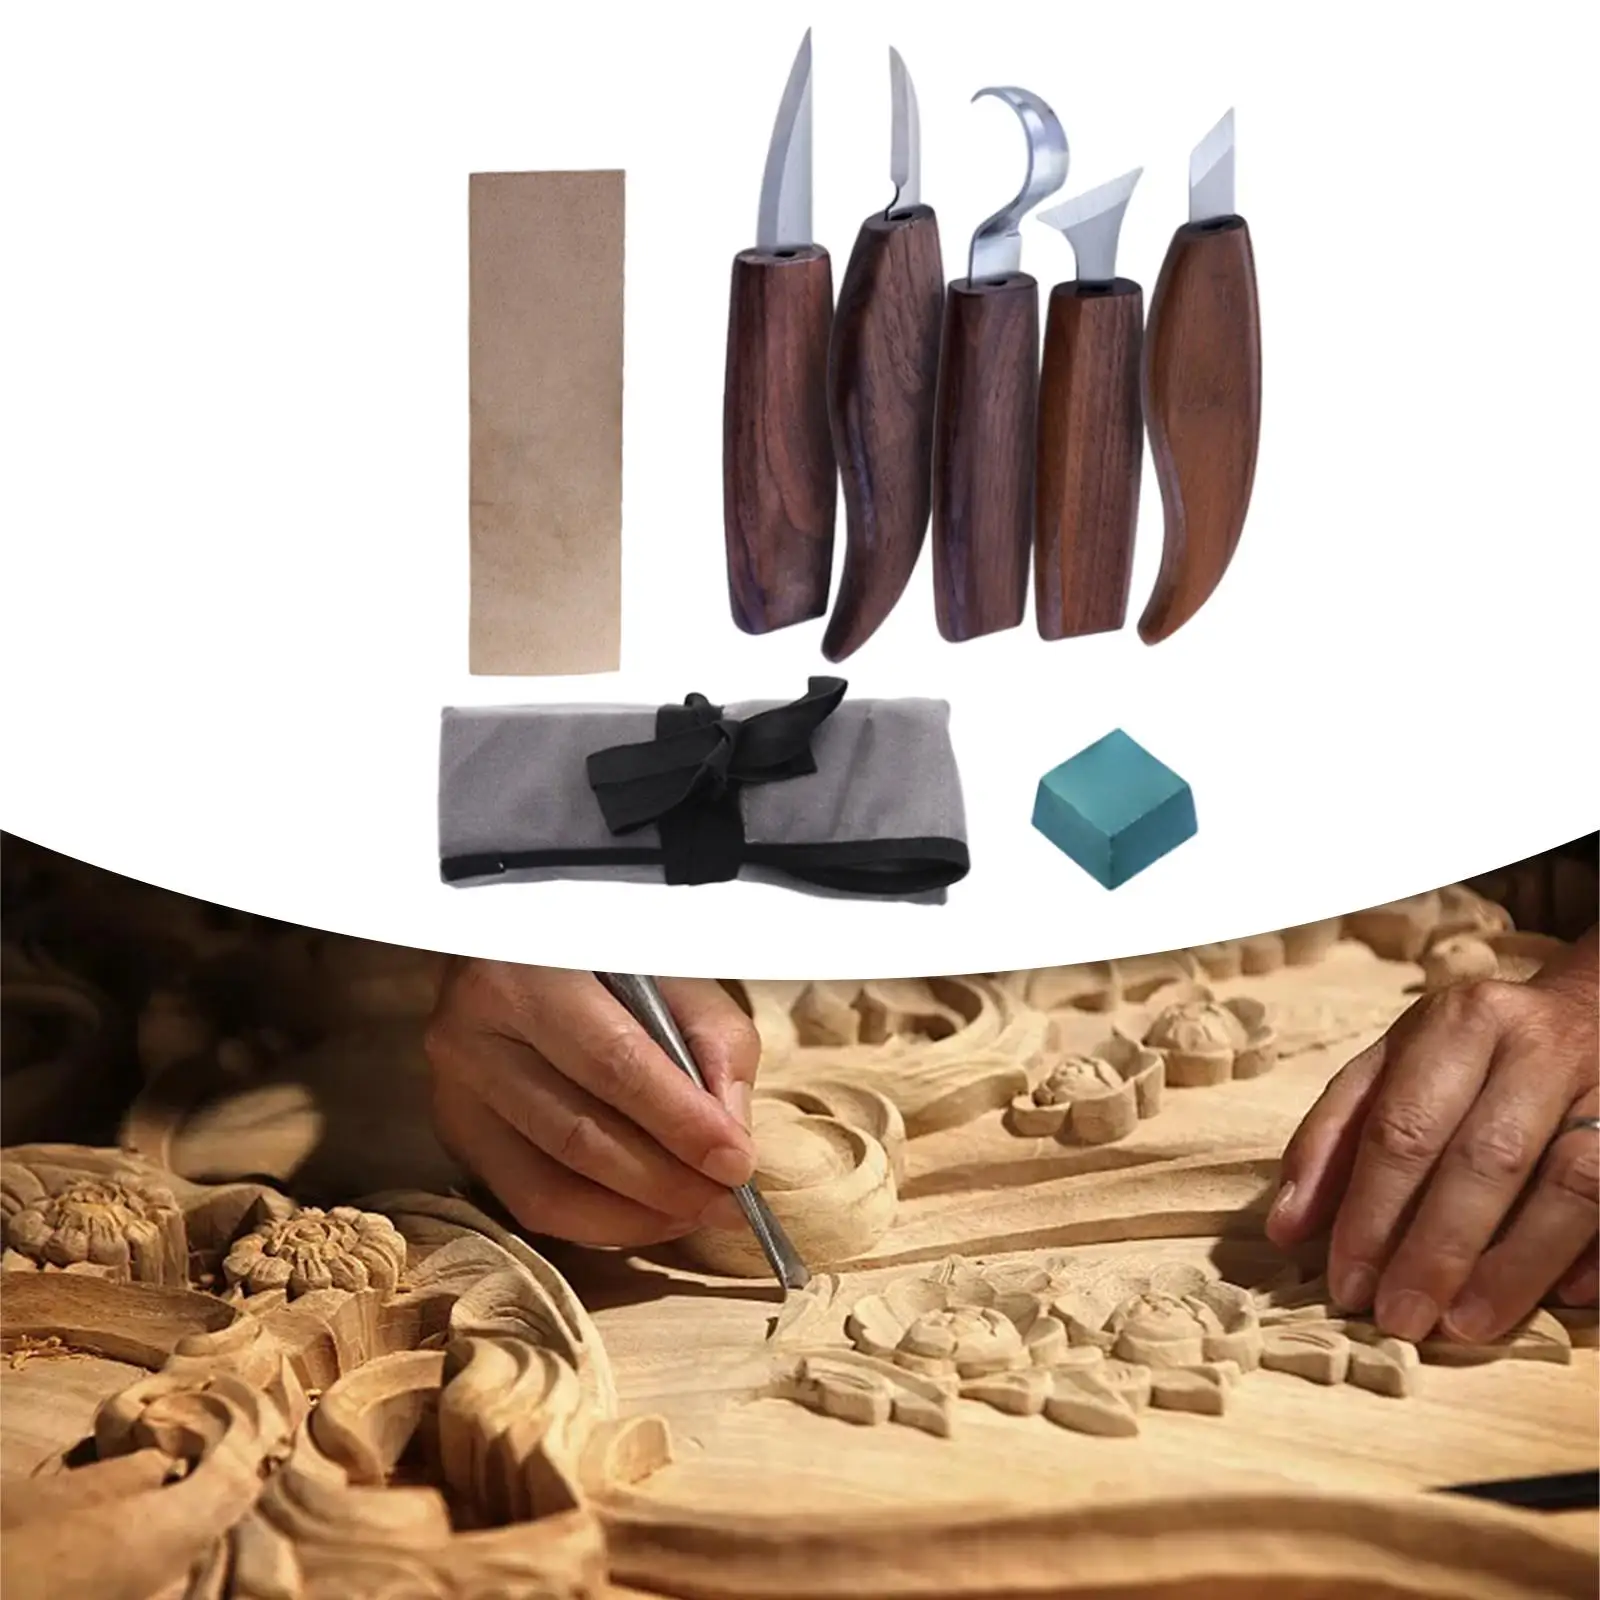 8Pcs Wood Carving Kits Wear Resistant Flat Handle Durable Beginners Whittling Kits for Paper Carving Handmade Wood Carving